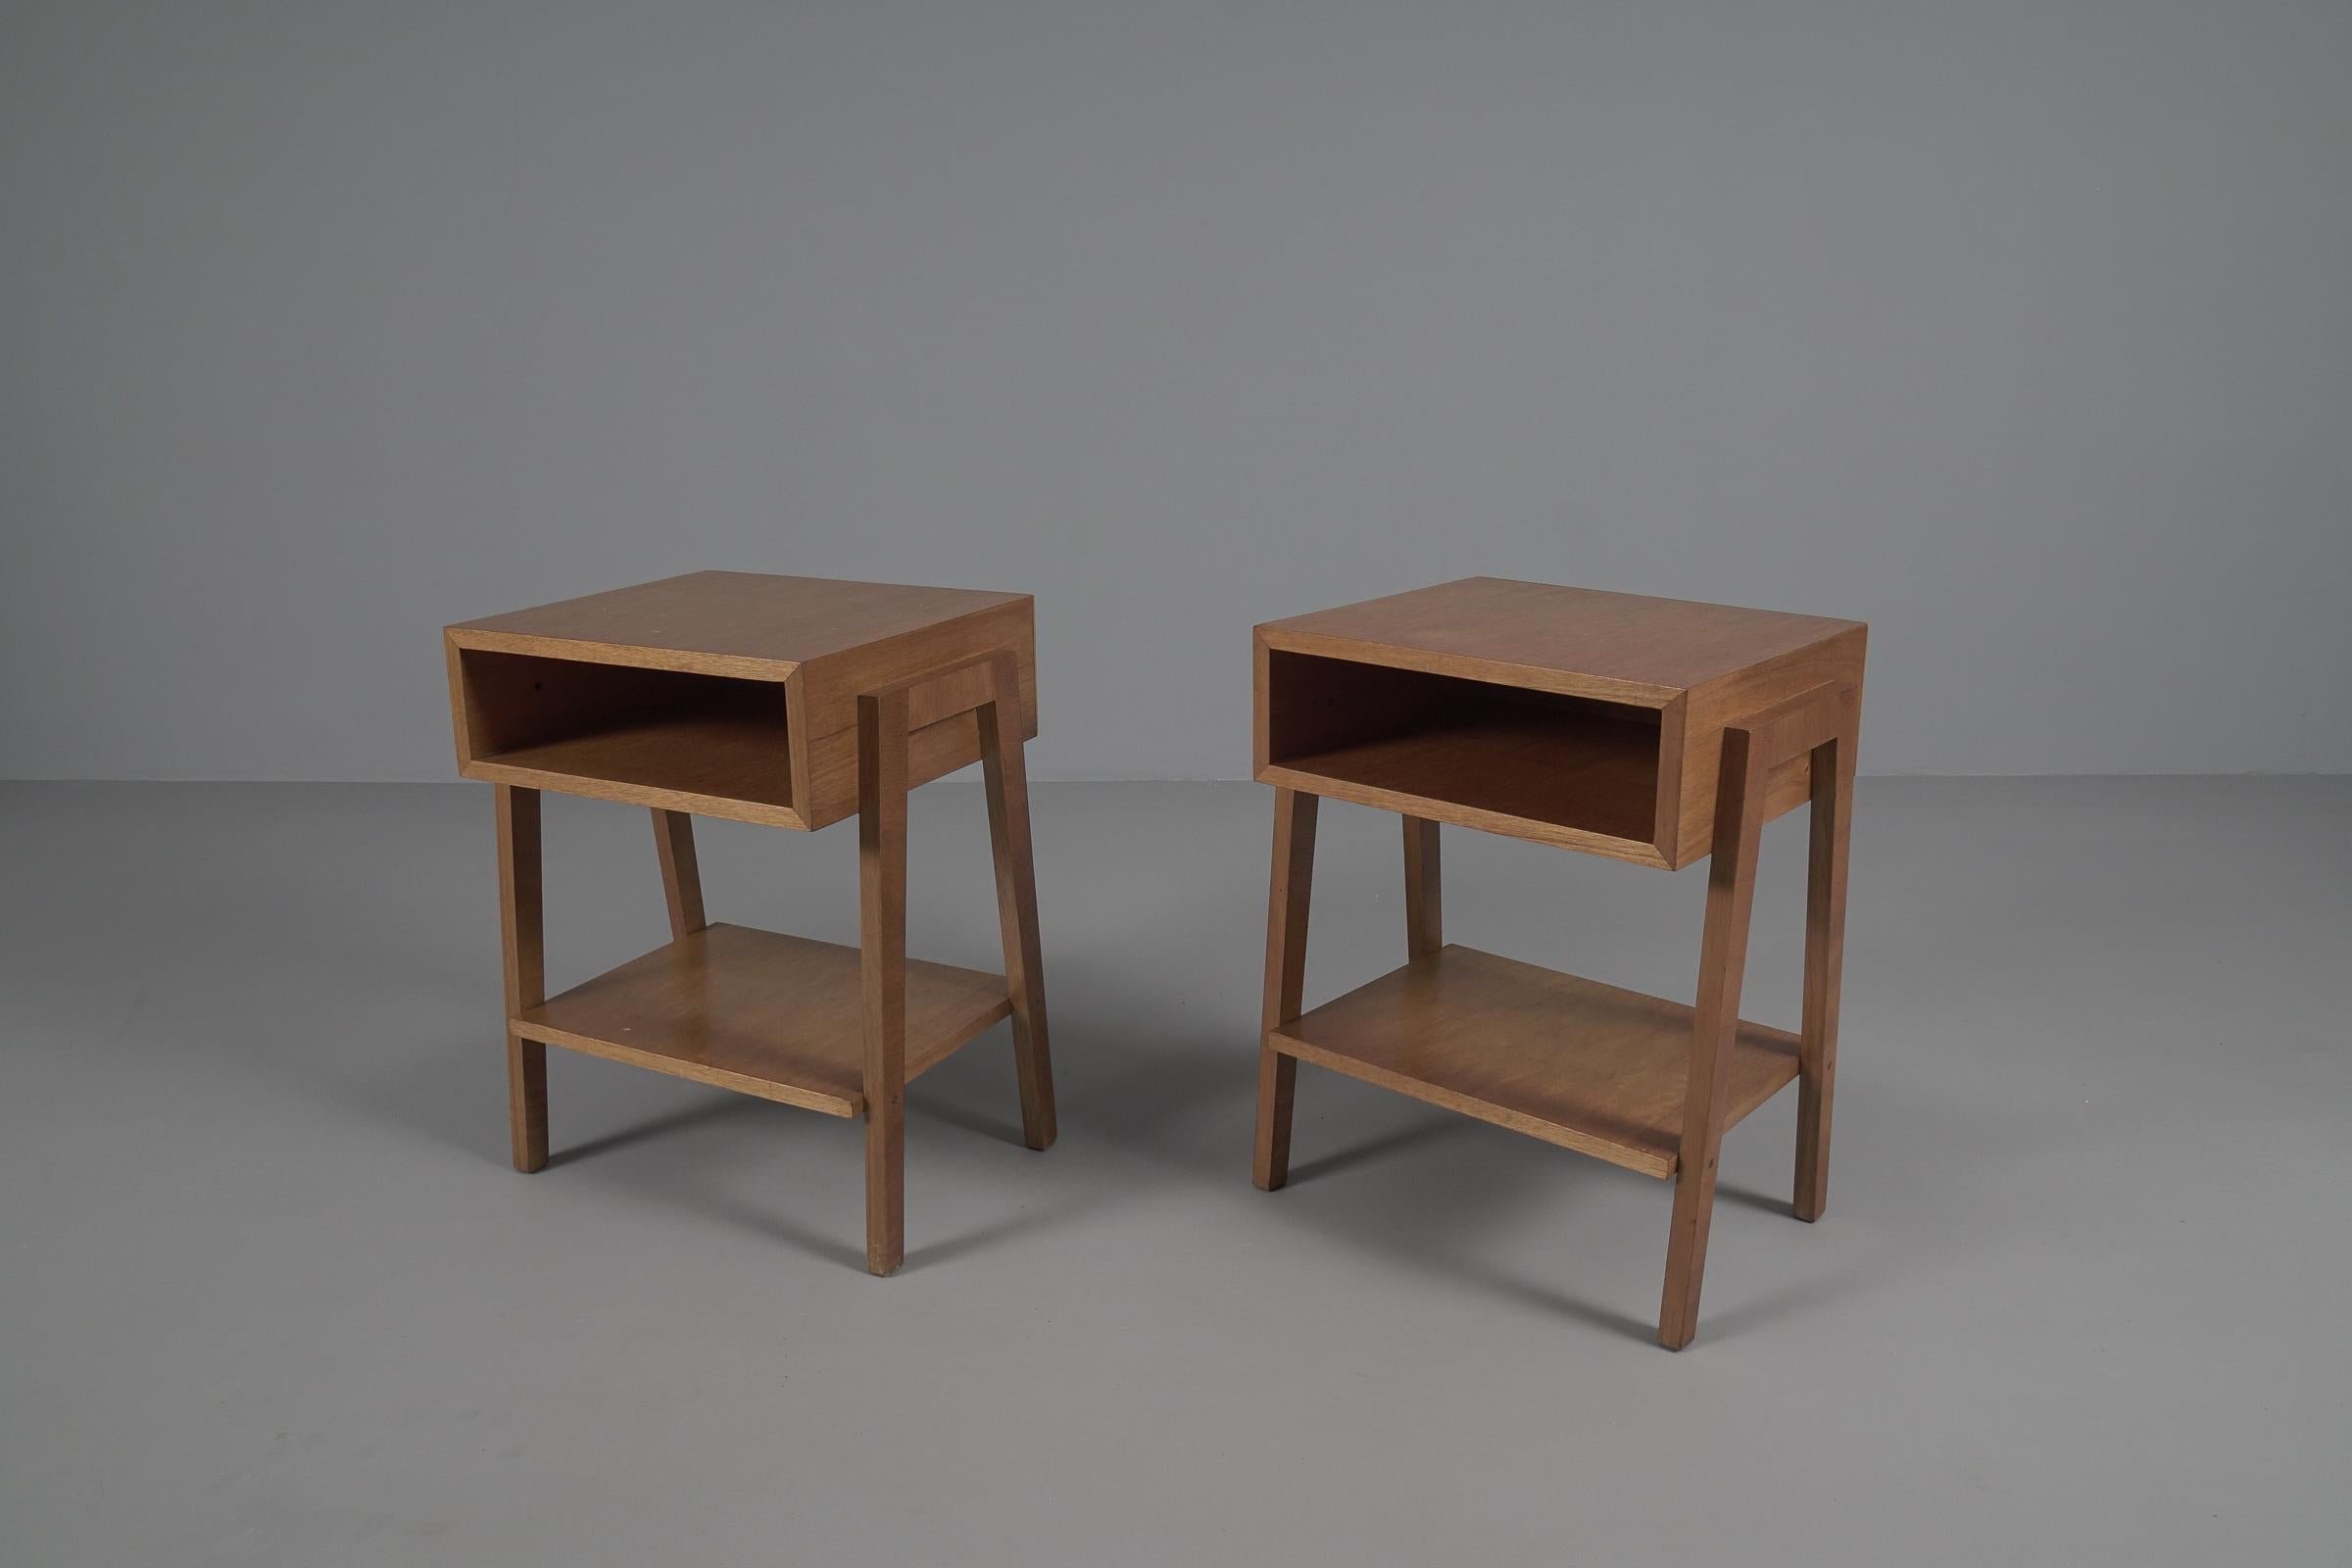  Pair of Minimalistic Mid-Century Modern Wooden Nightstands, Italy 1950s For Sale 2